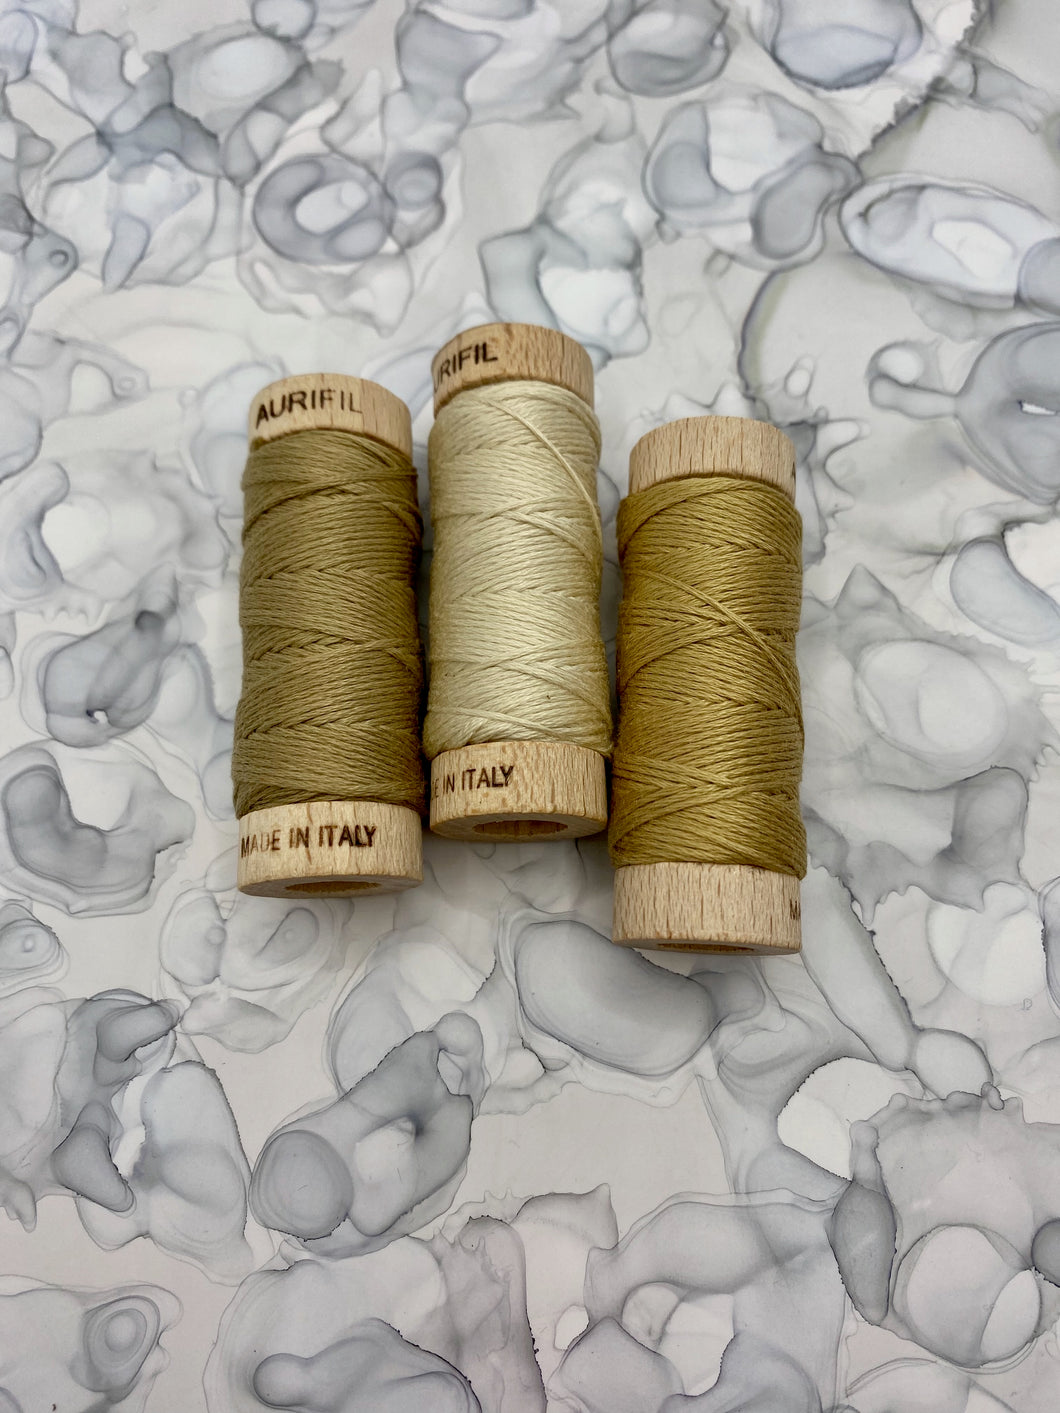 Aurifil Beige and Cream Set of three 6-strand embroidery floss spools